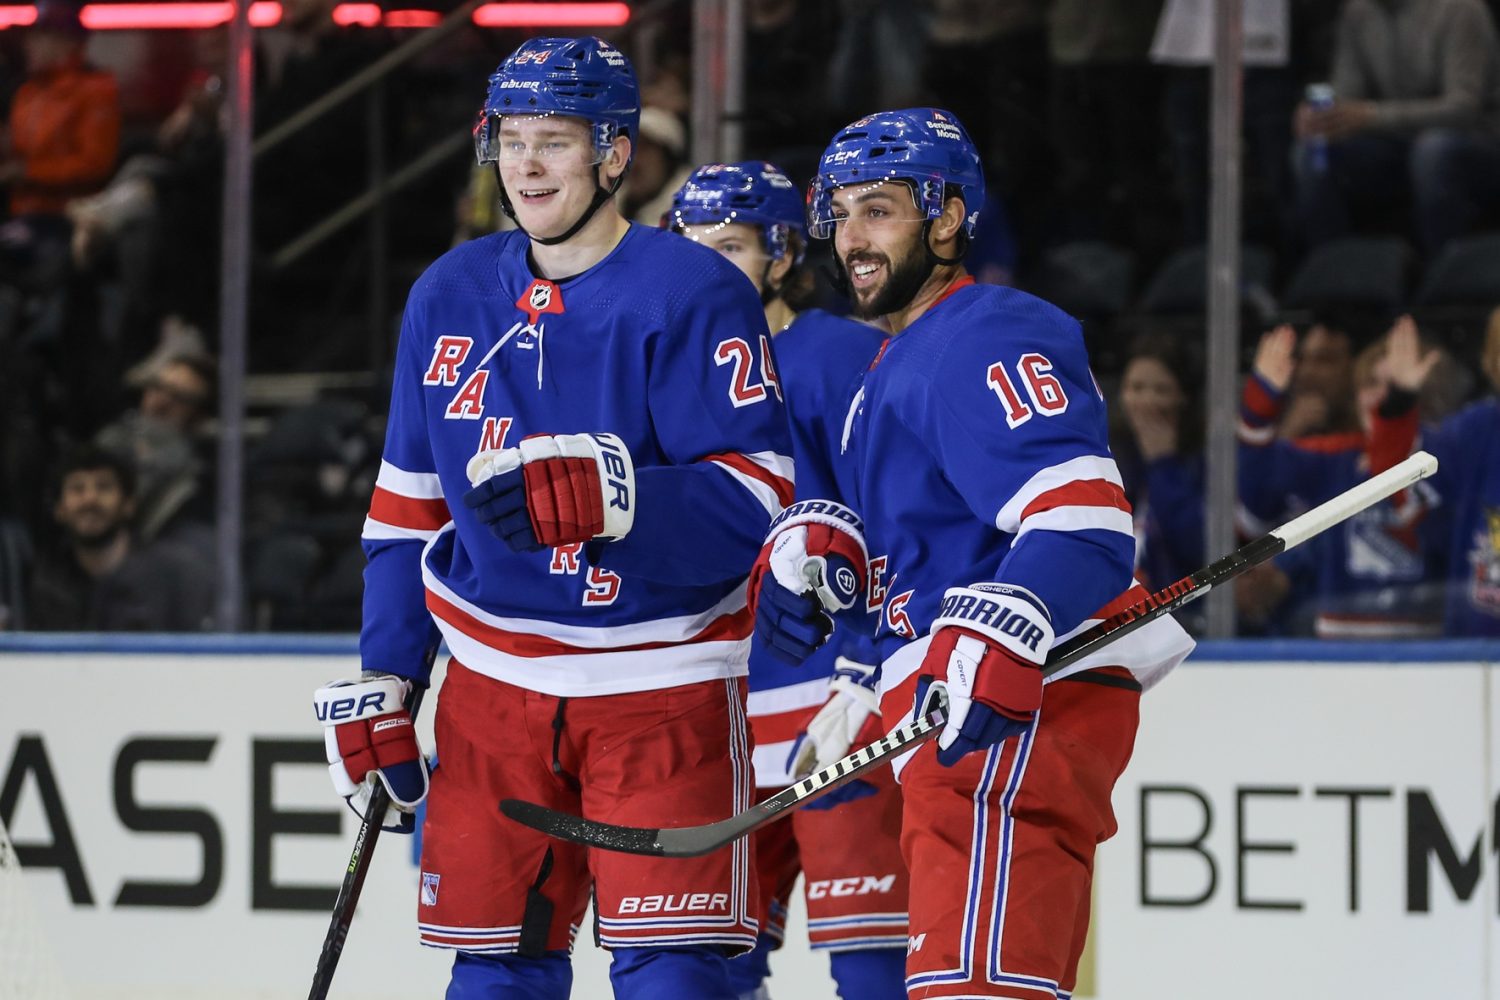 New York Rangers right wing Kaapo Kakko (24) celebrates with his teammates after scoring a goal in the first period against the New York Islanders at Madison Square Garden.